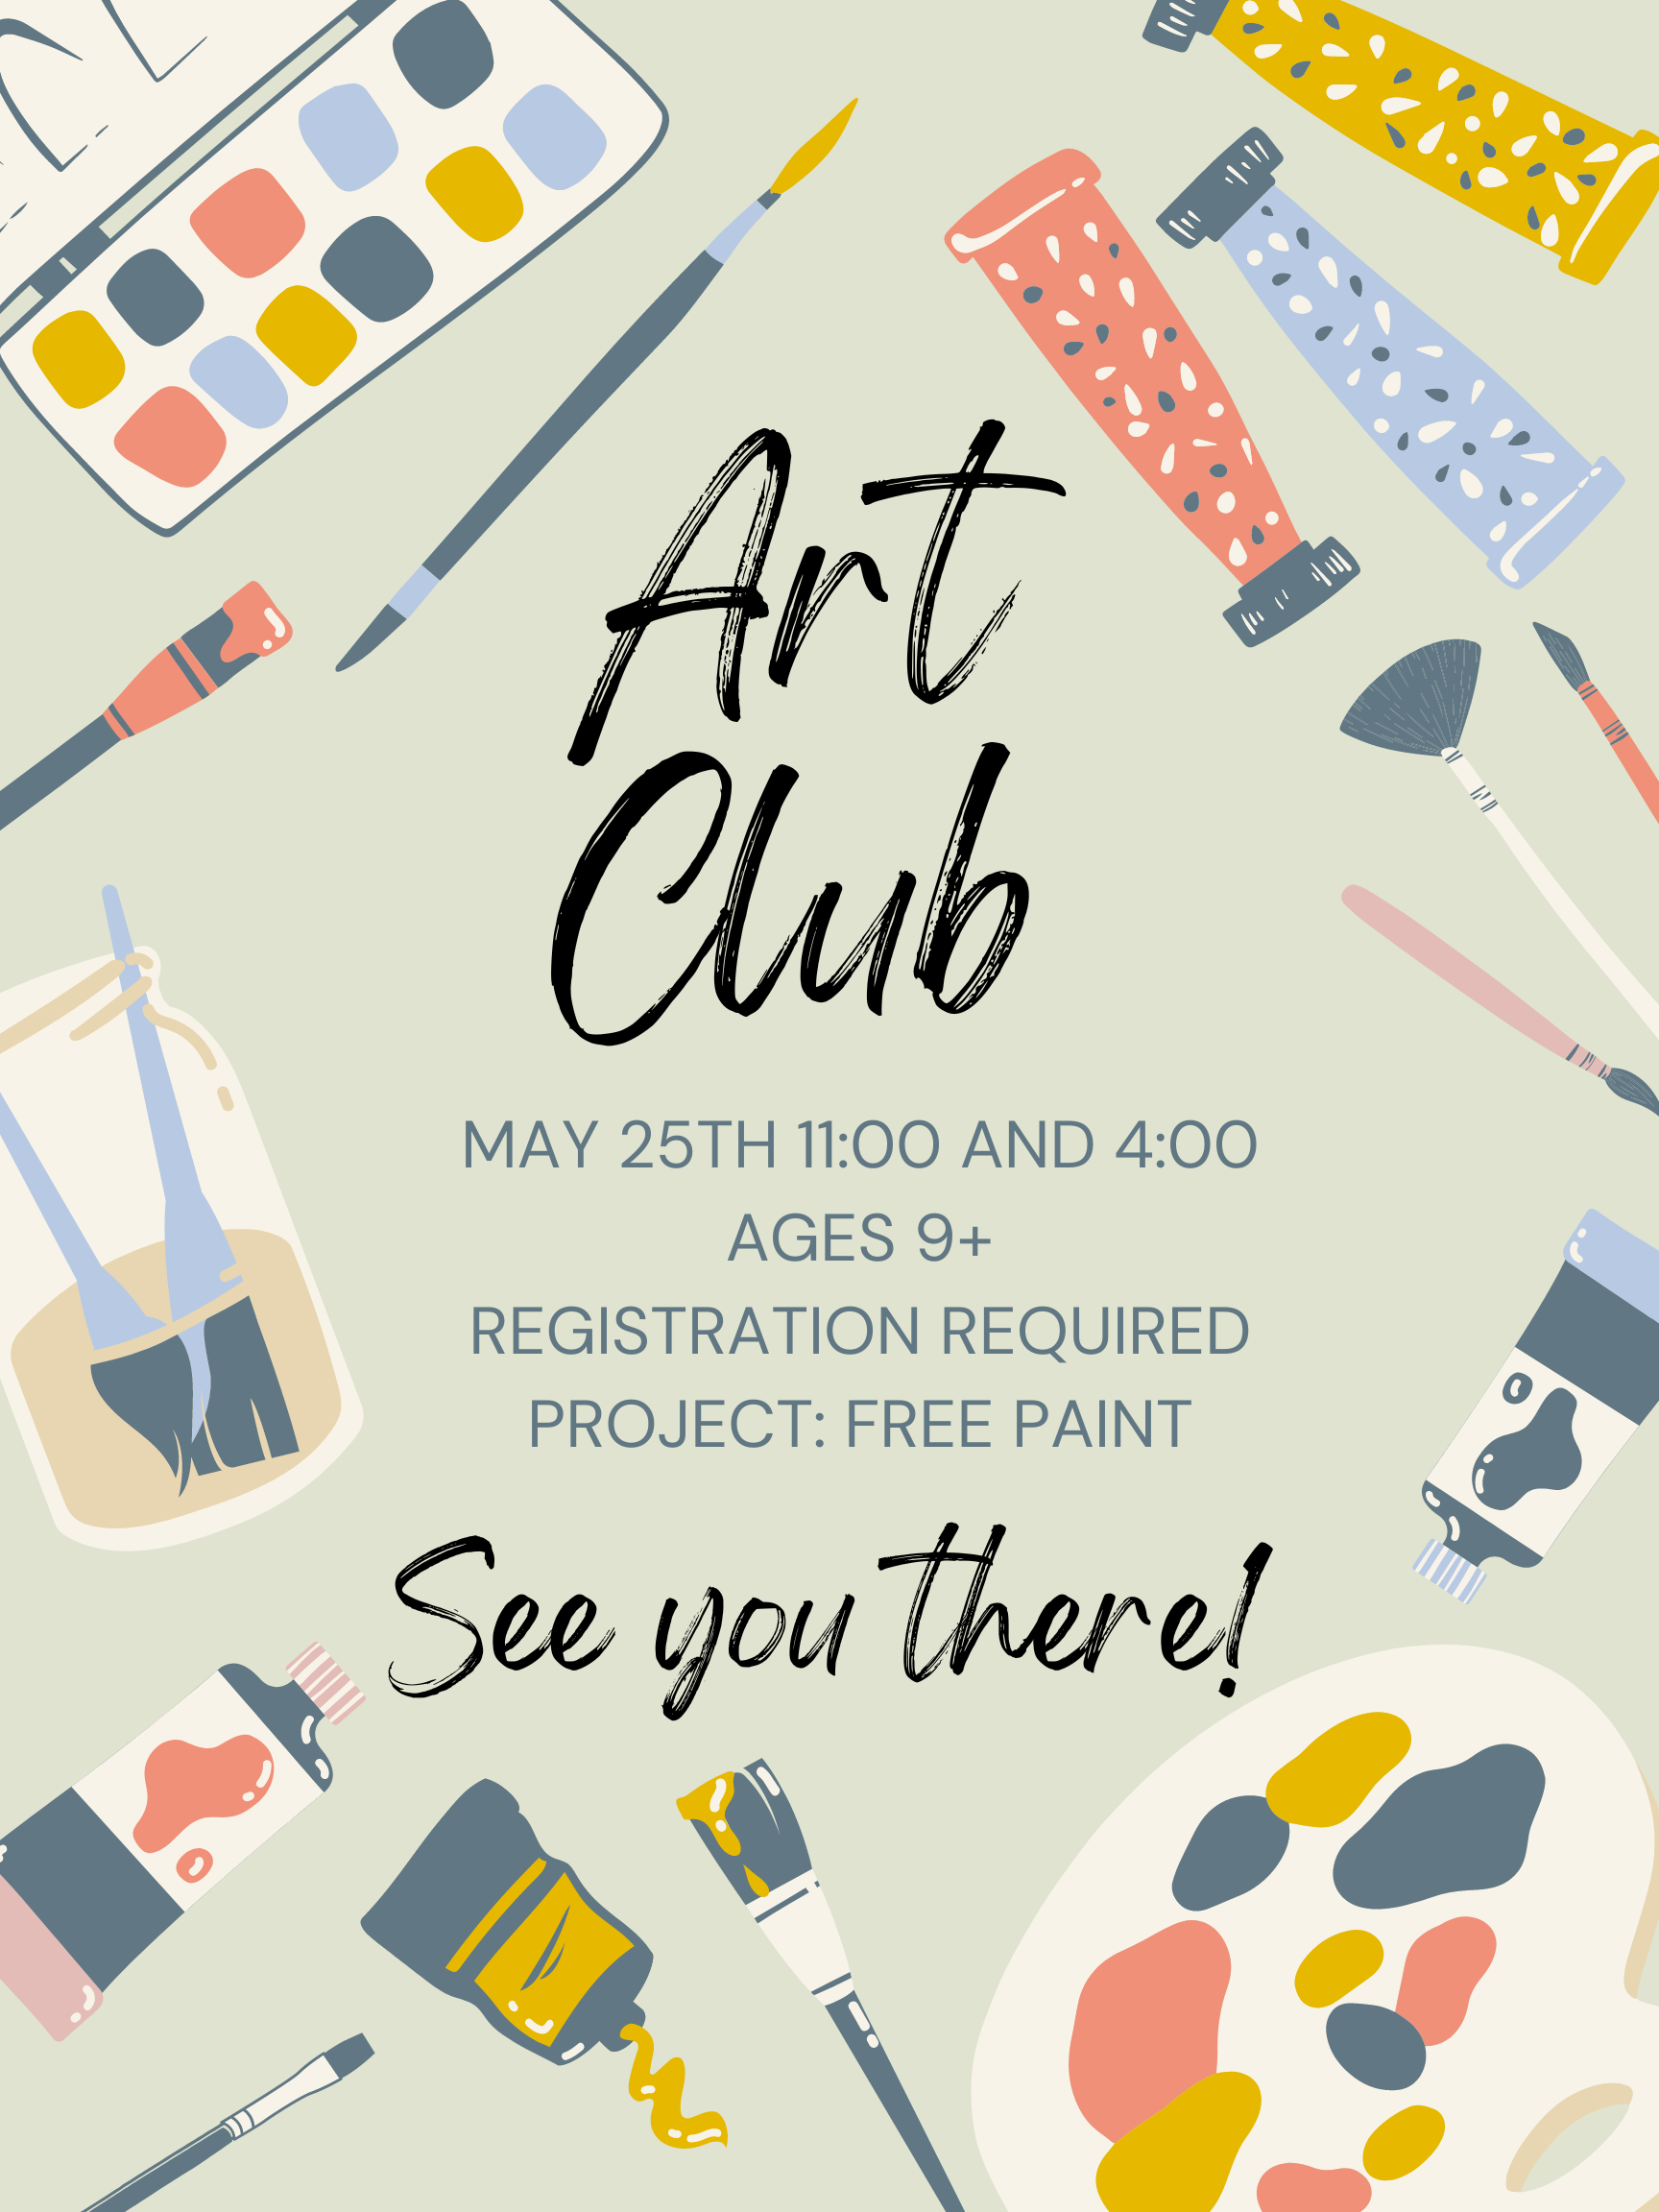 Art Club on May 25th at 11am and 4pm for ages 9 and up. May project is Free Paint